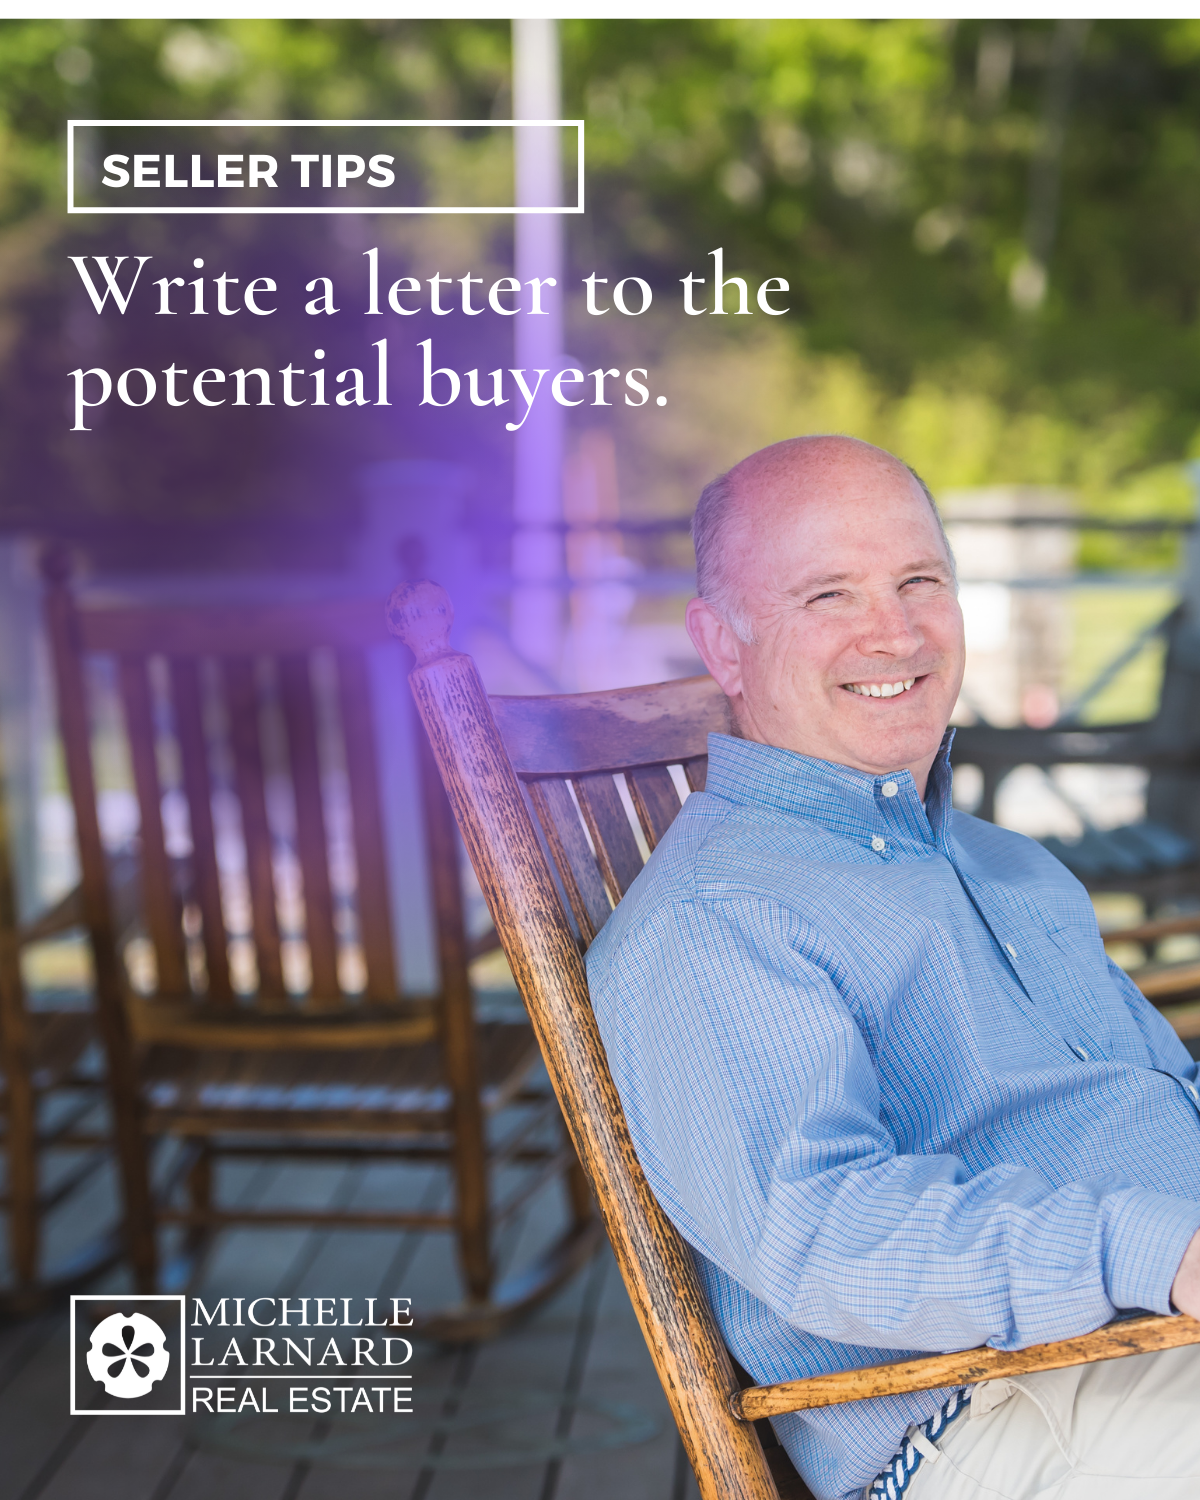 Bill Tierney Cohasset Ma write a seller letter